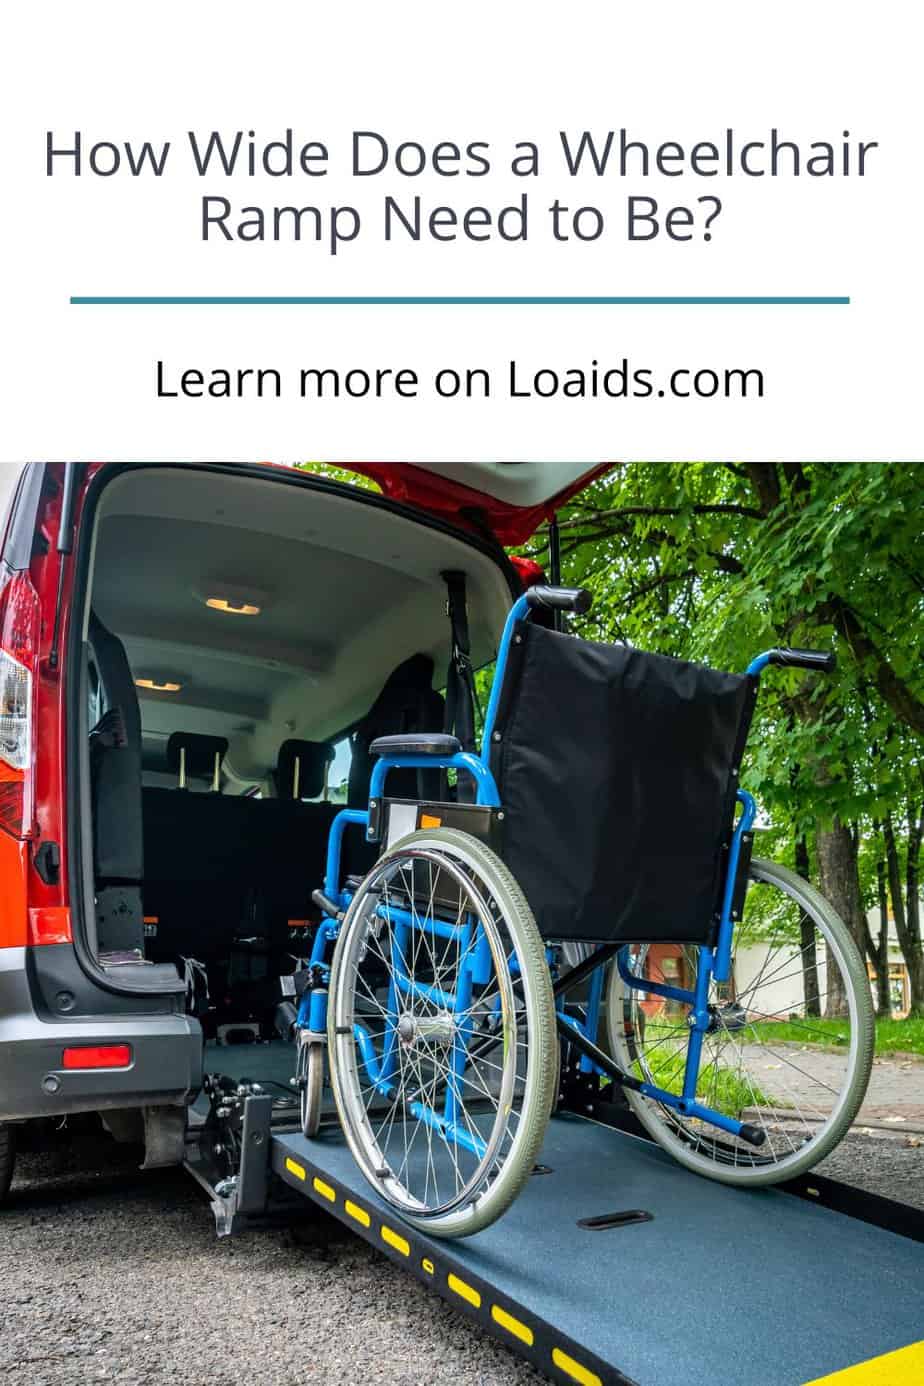 How Wide Does a Wheelchair Ramp Need To Be